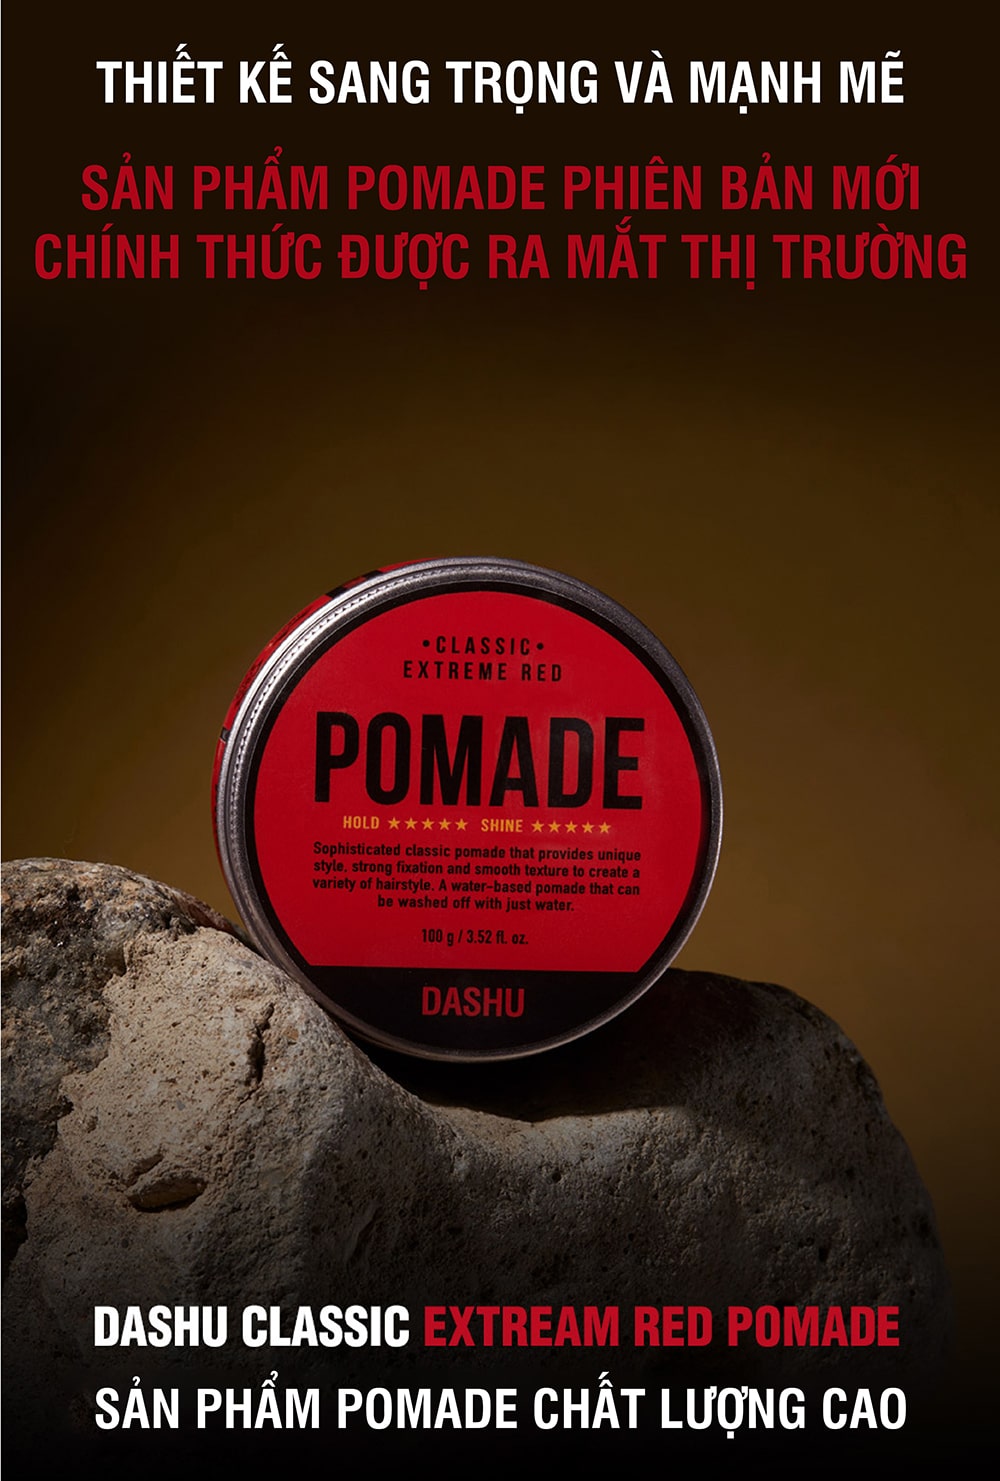 Dashu Classic Renewal Extreme Red Pomade